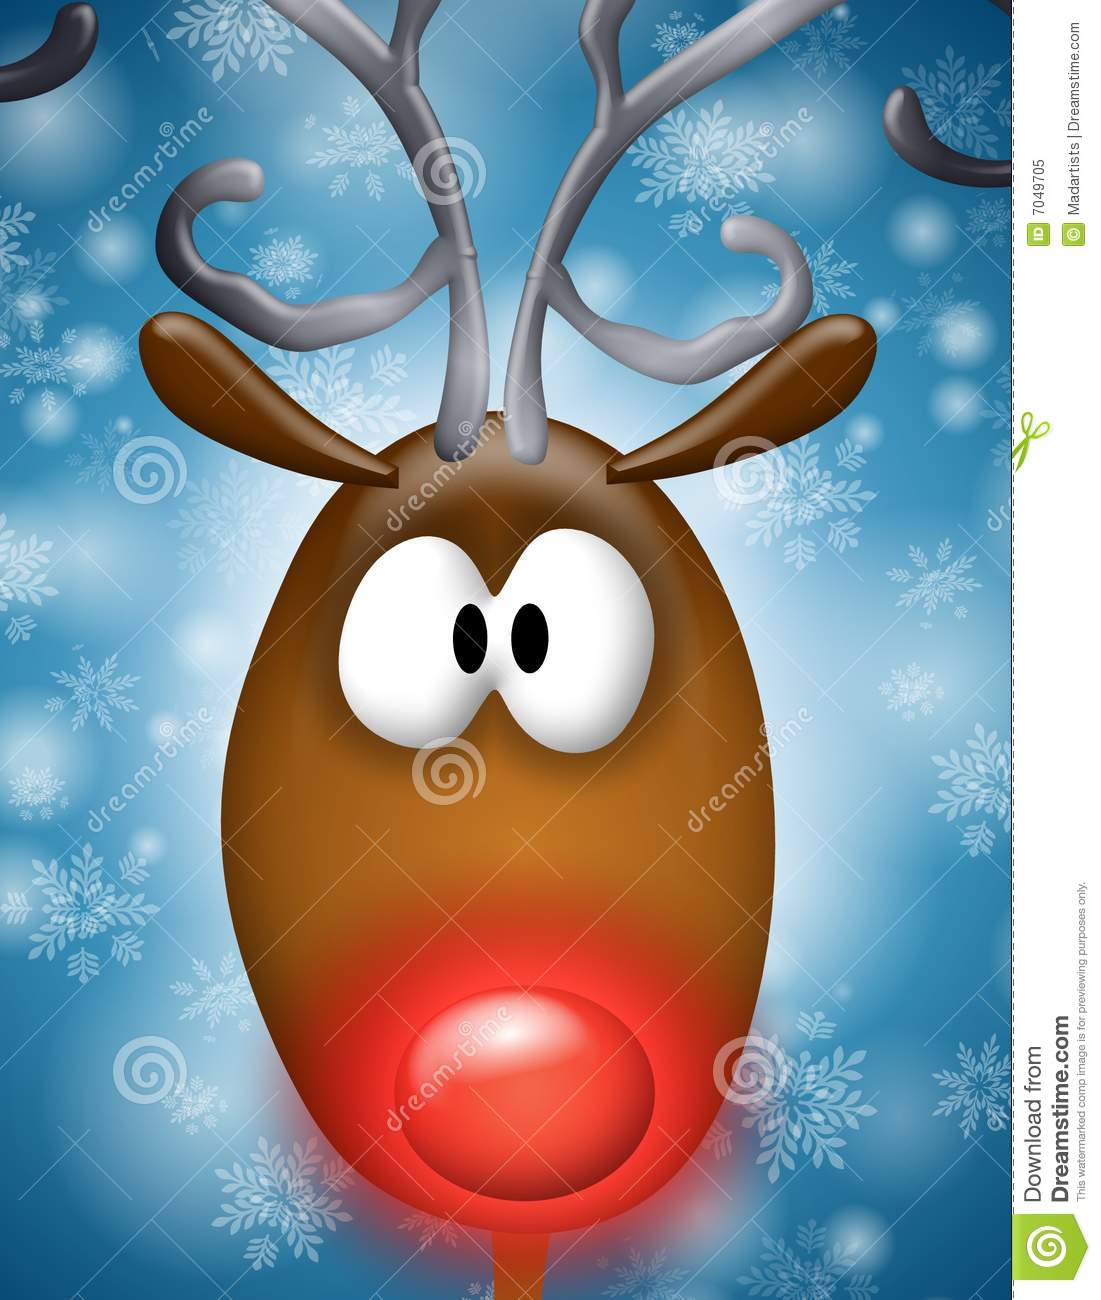 HQ Rudolph The Red-nosed Reindeer Wallpapers | File 118.9Kb